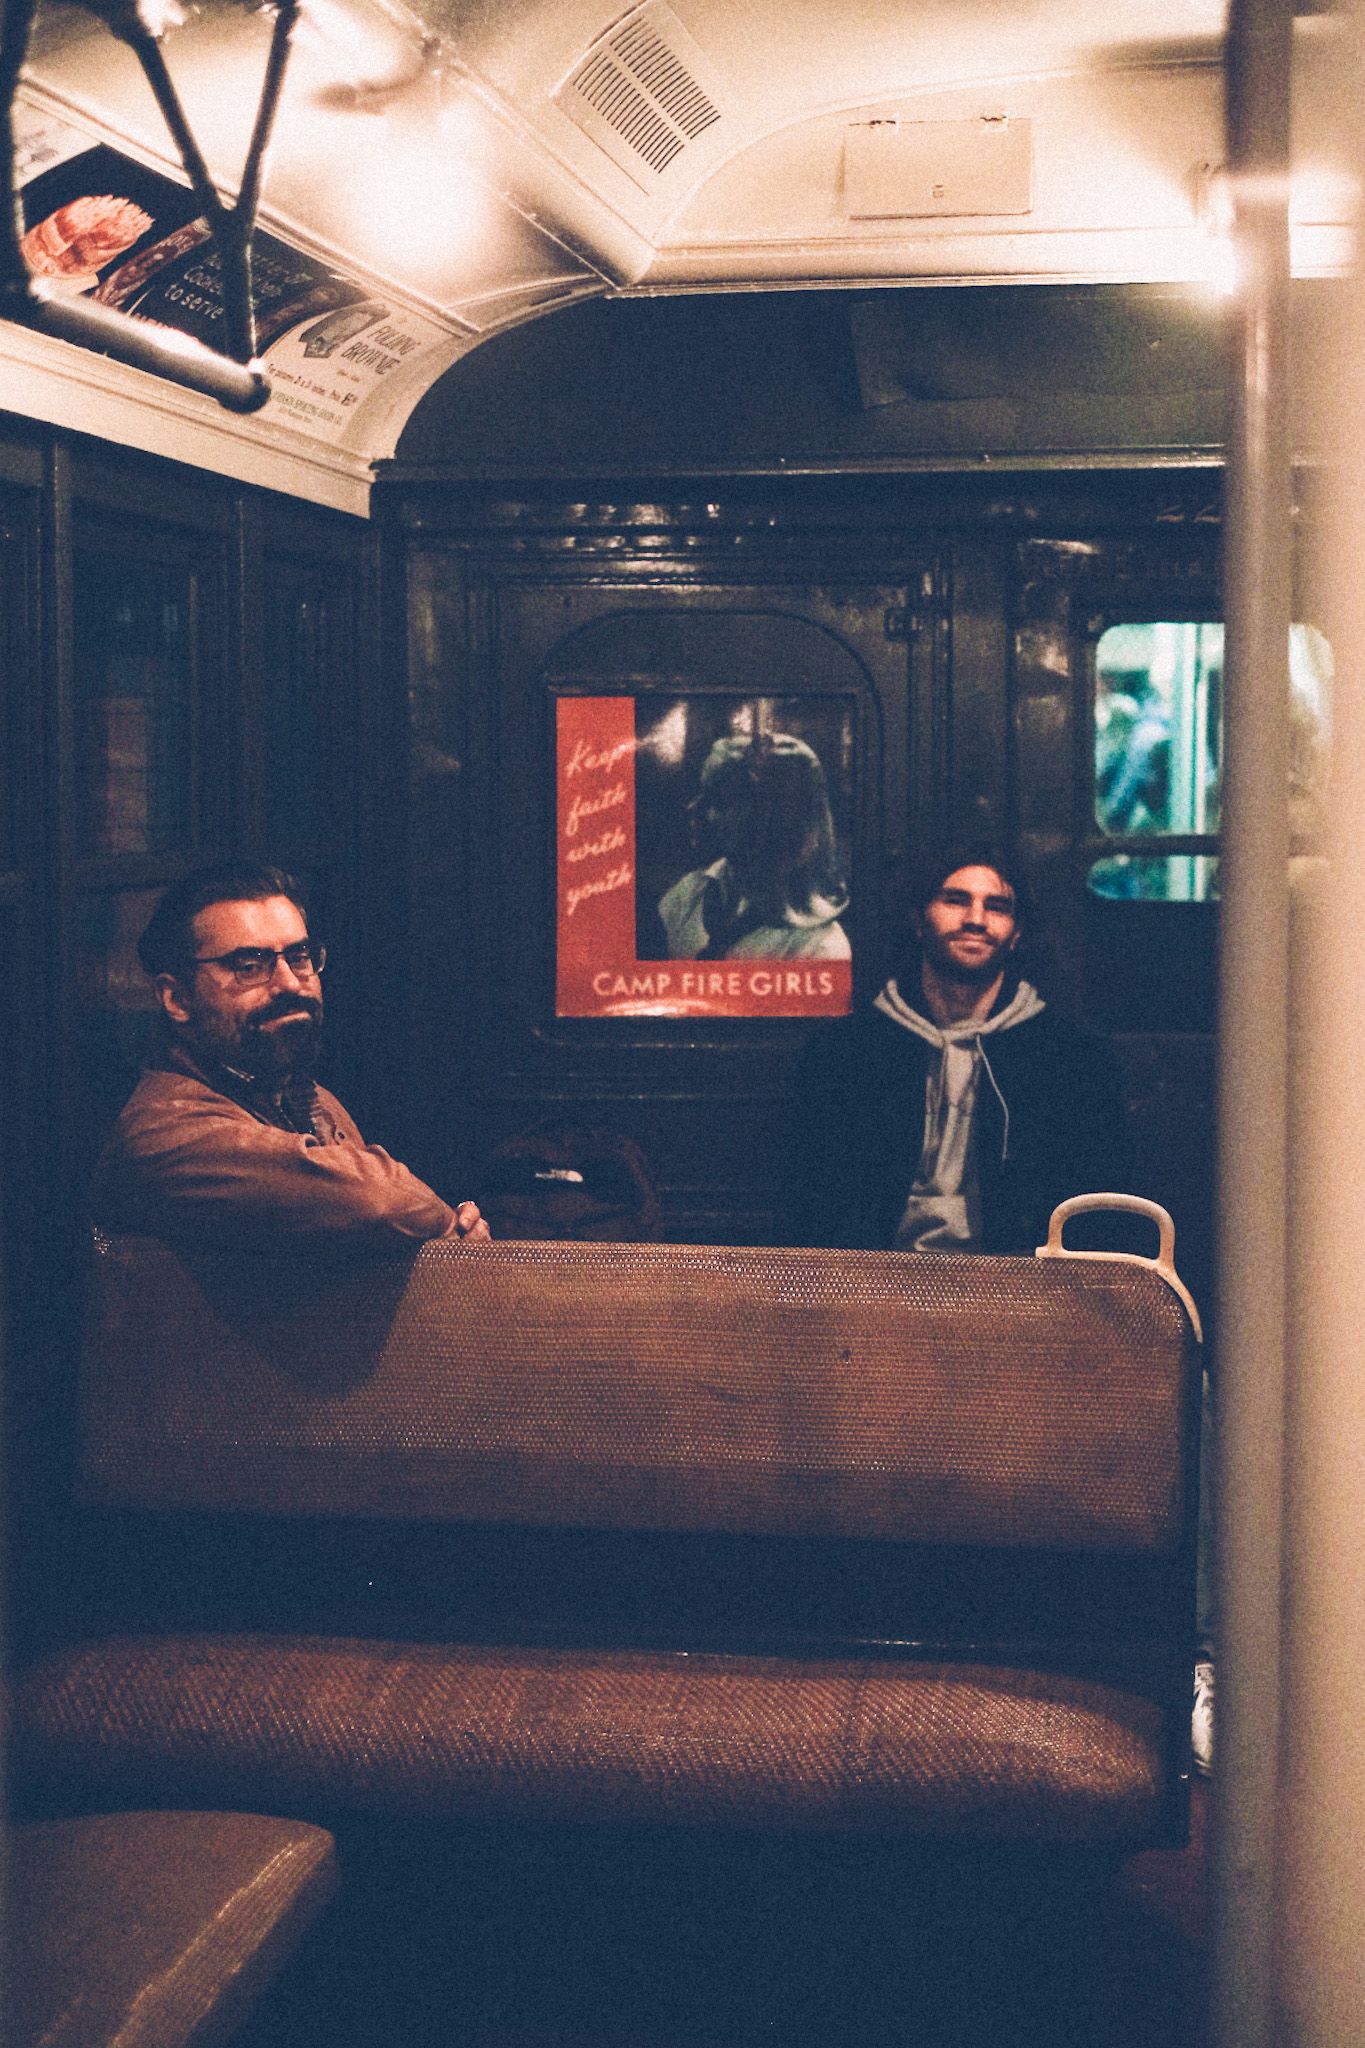 Two men sit in the seats of a vintage subway car in low light.